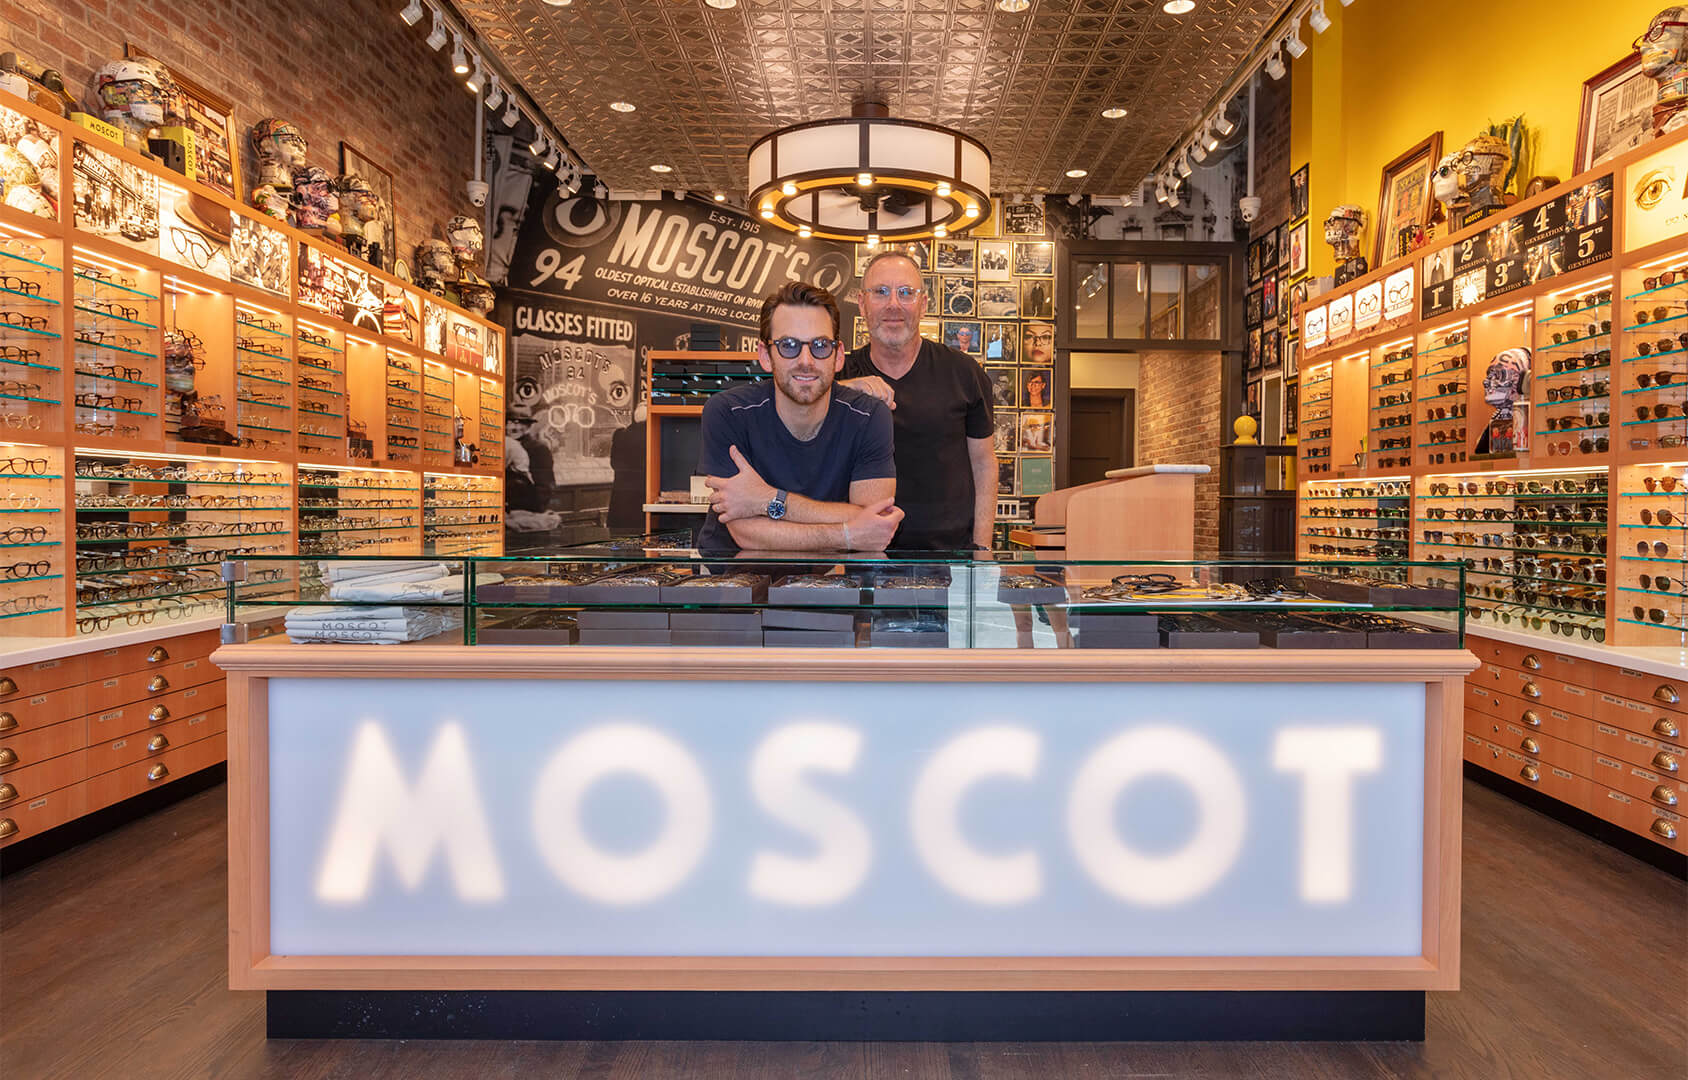 Moscot opens in Austin, Texas as the first Shop in Texas!